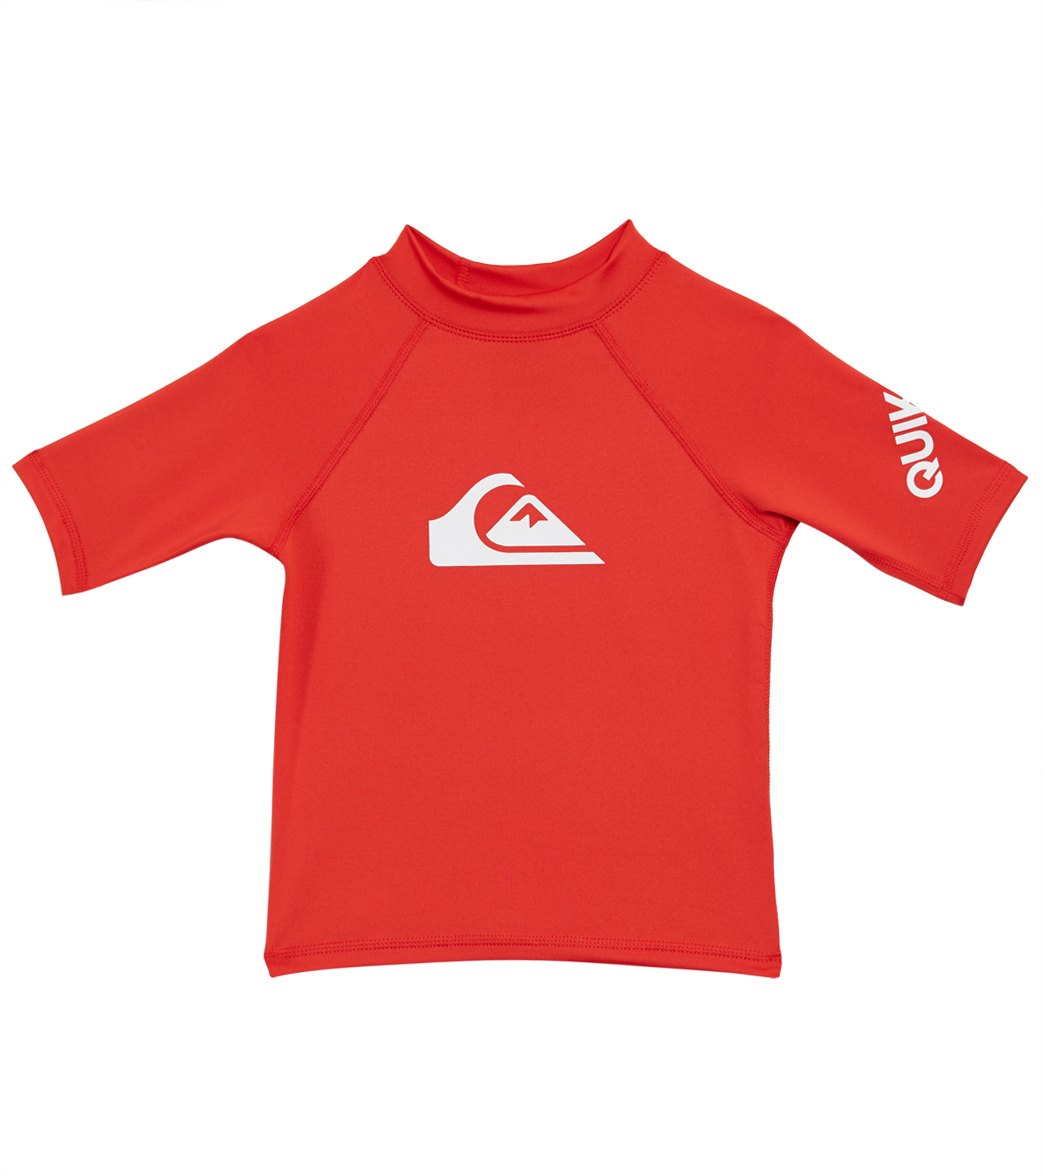 Quiksilver All Time Short Sleeve Rash Guard Toddler Little Kid At